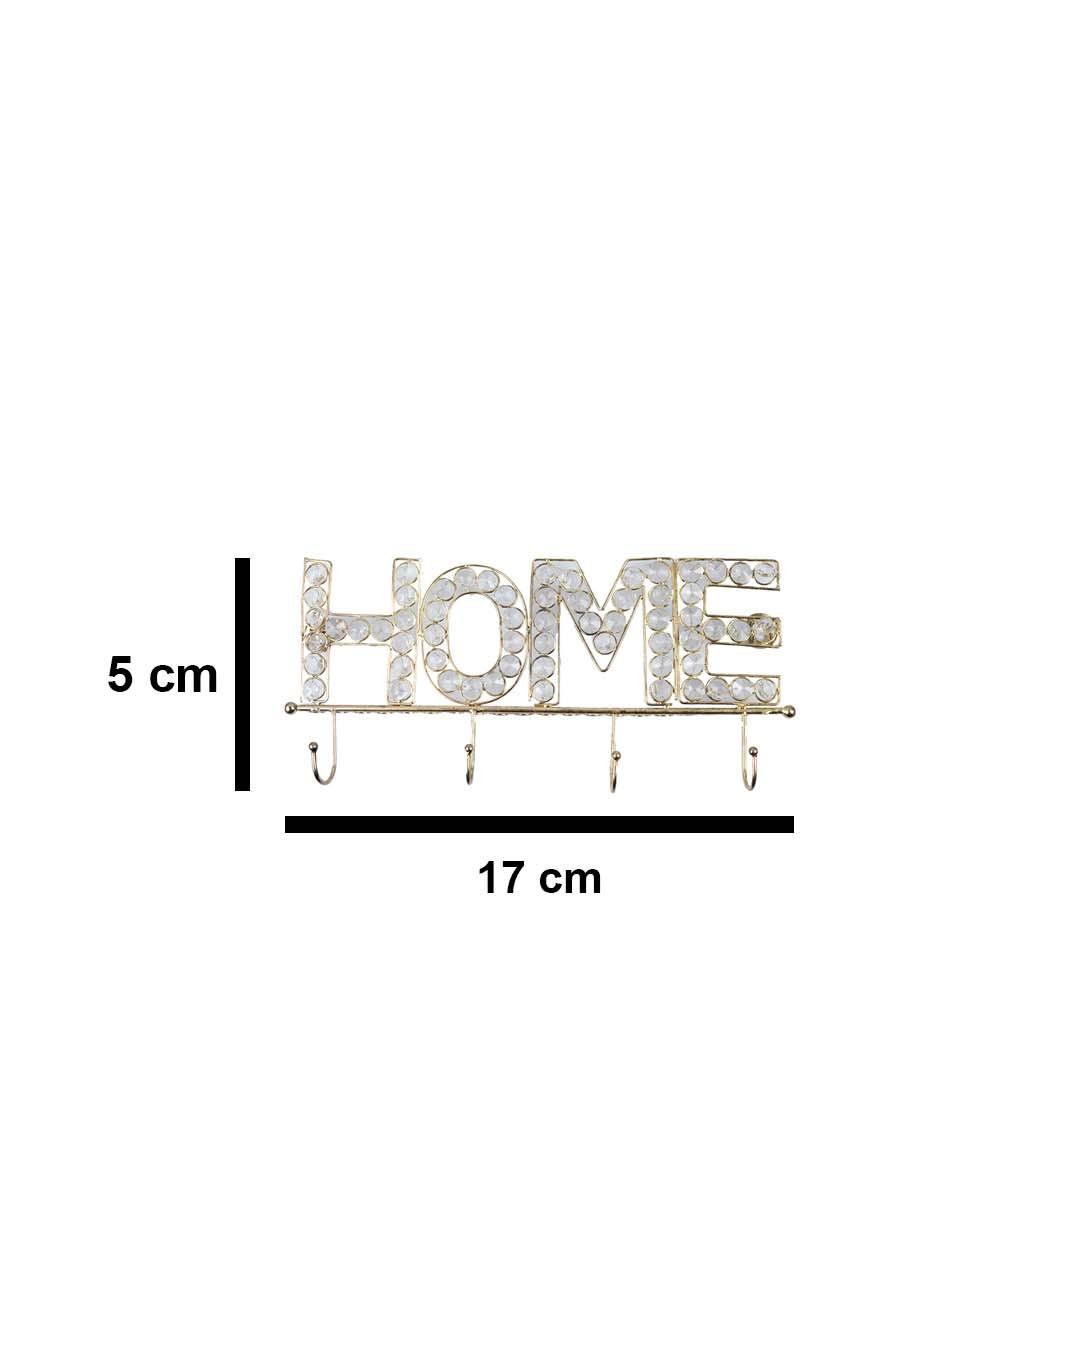 "HOME Sign" Silver Crystal Wall Mounted Décor Hook, 4 Hooks, Golden, Iron - MARKET 99